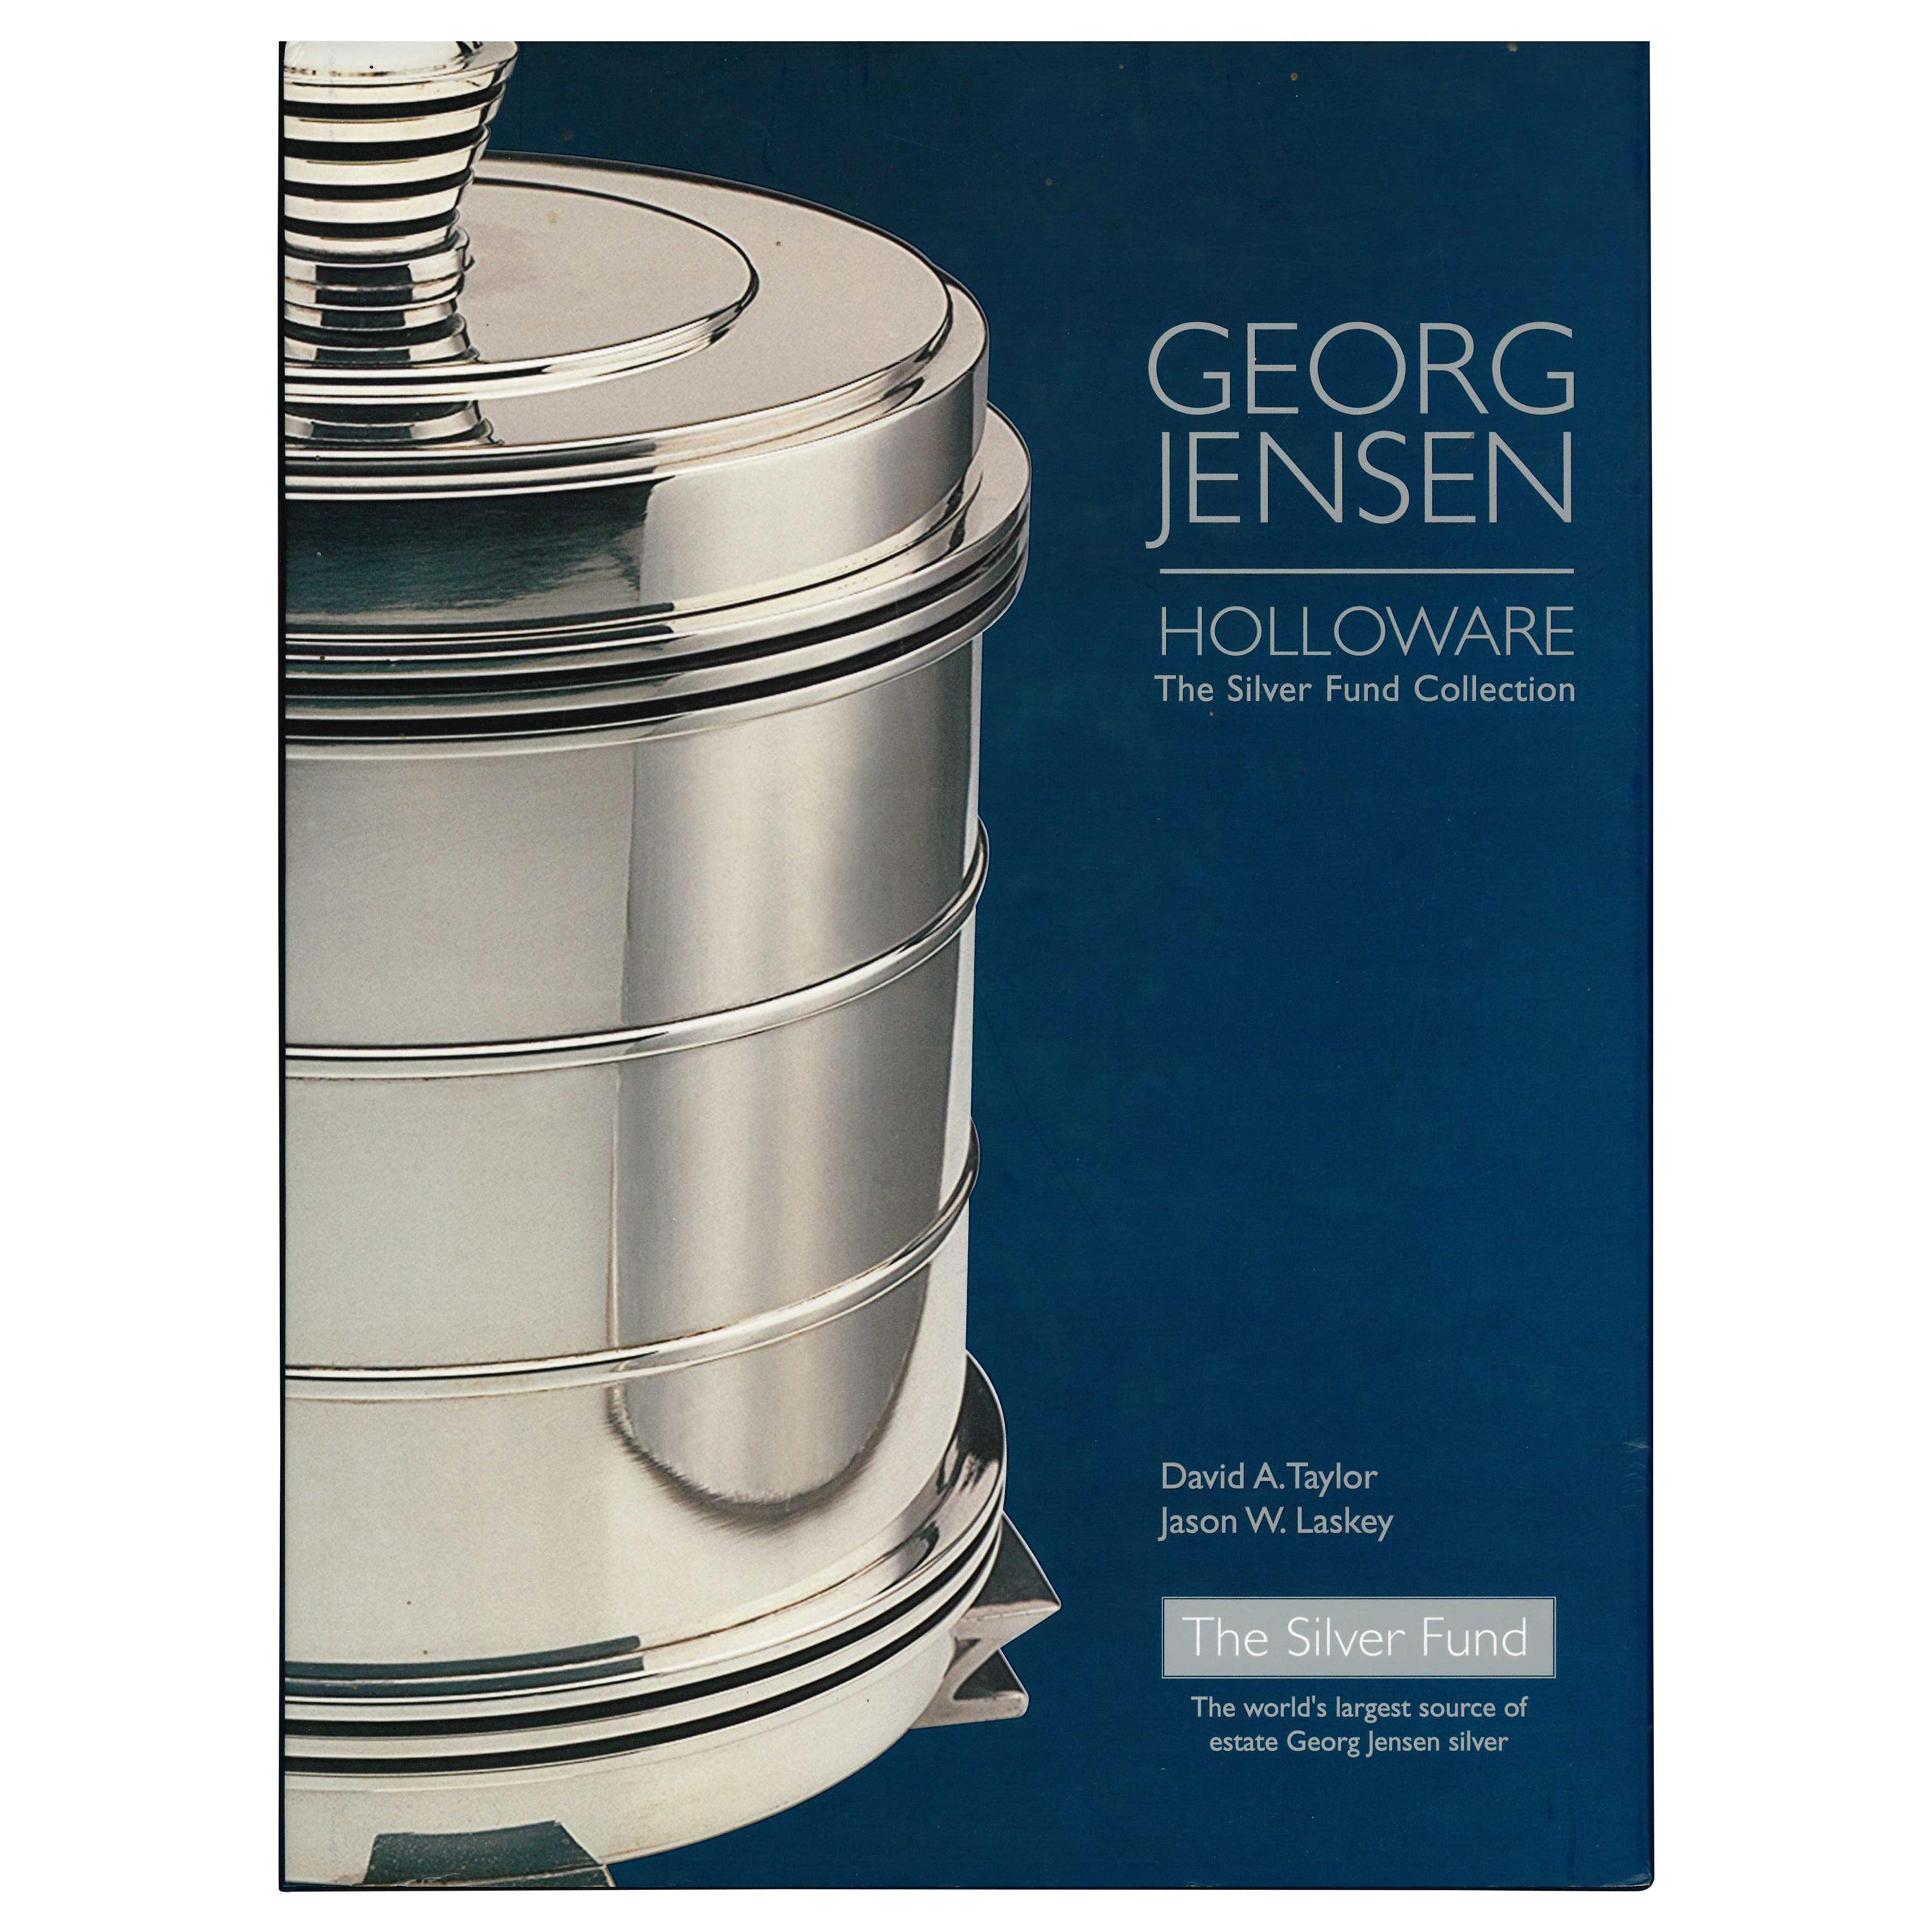 Georg Jensen: Holloware The Silver Fund Collection Book)